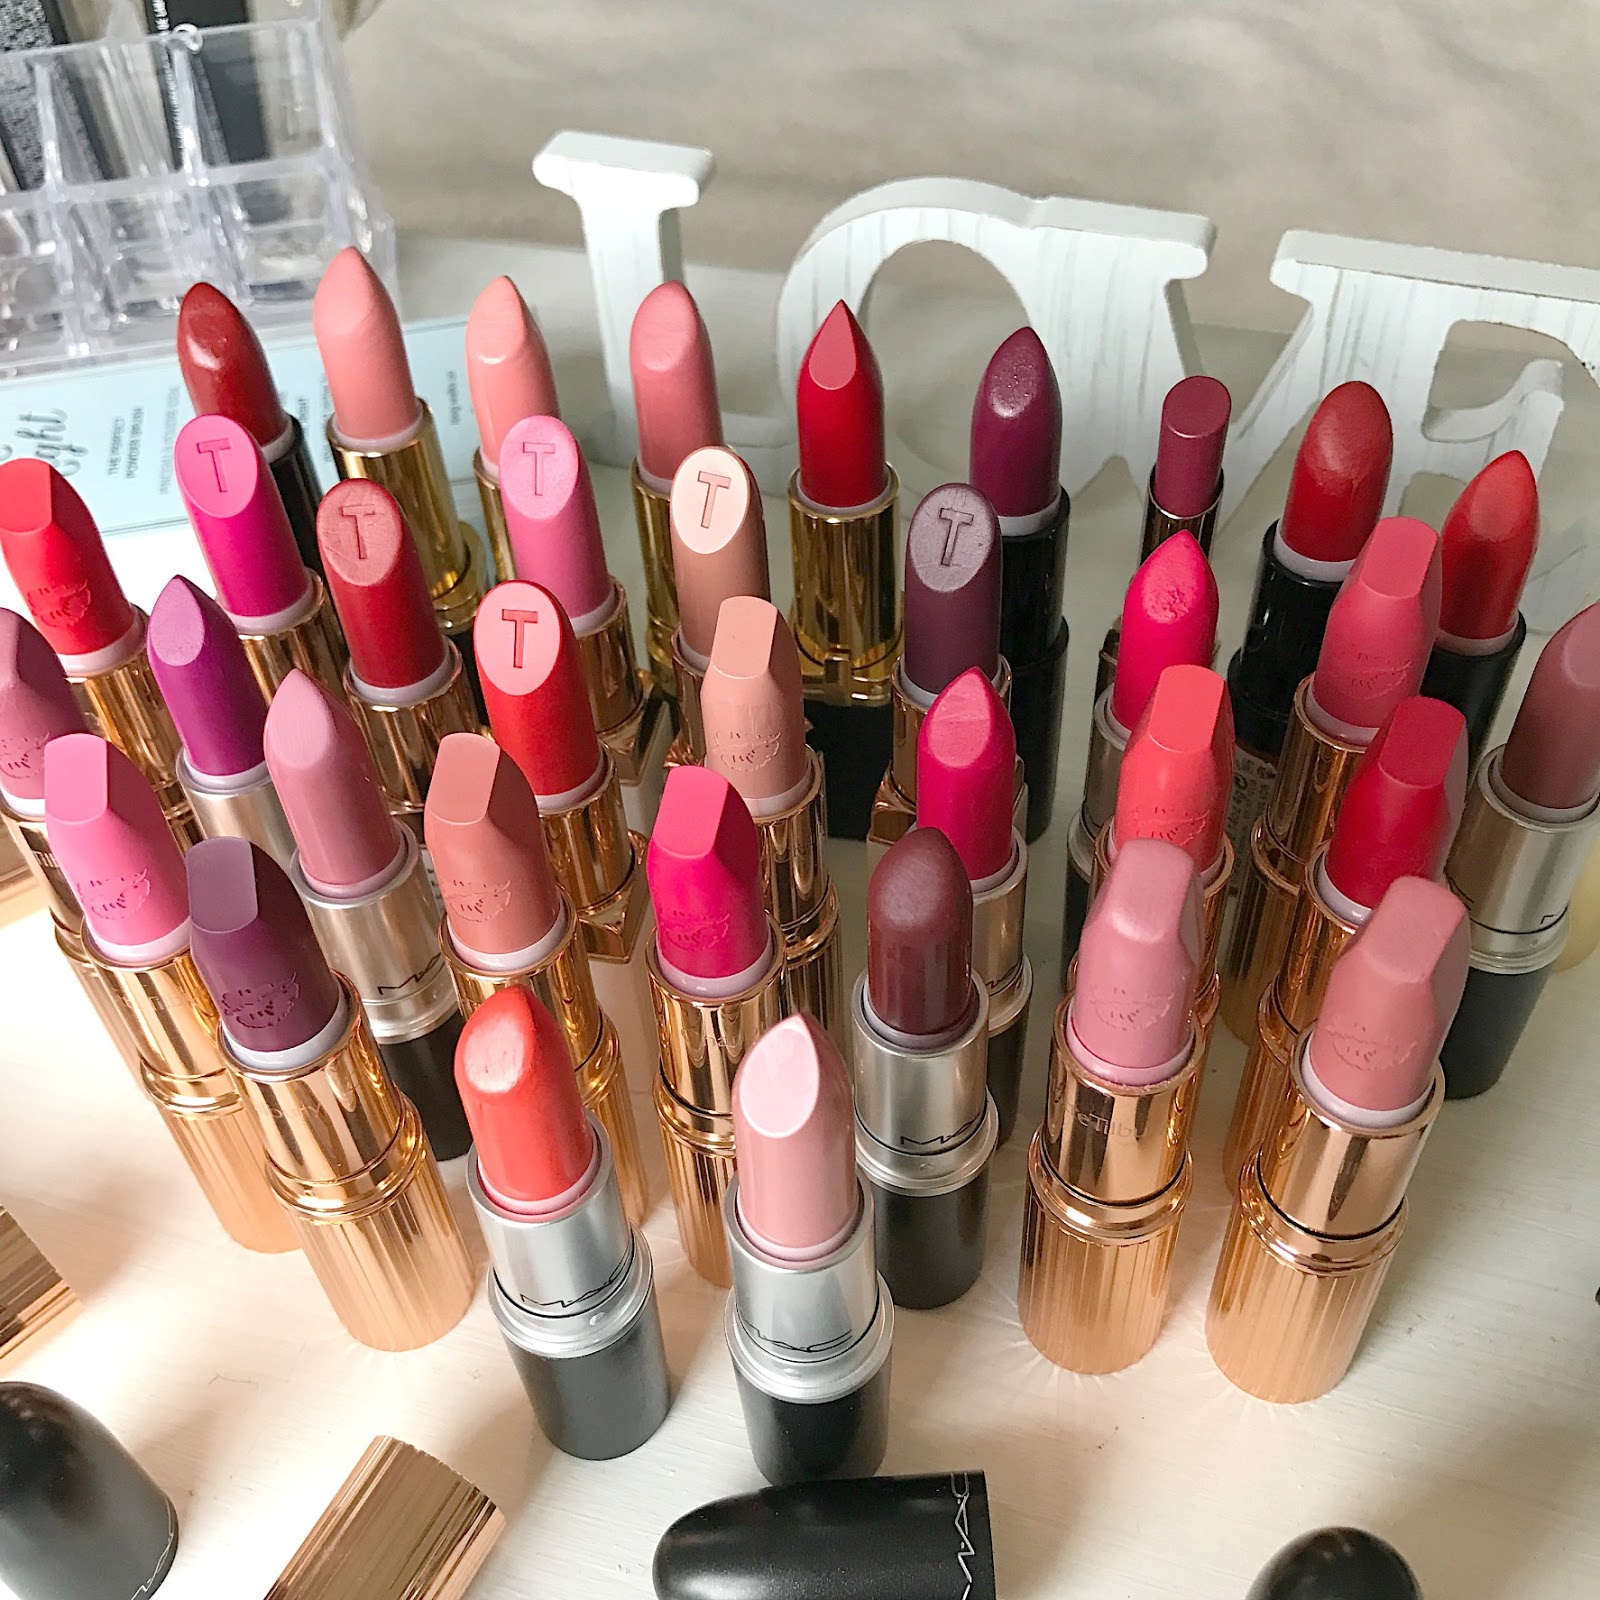 Sophie Jade : My Entire Lipstick Collection.